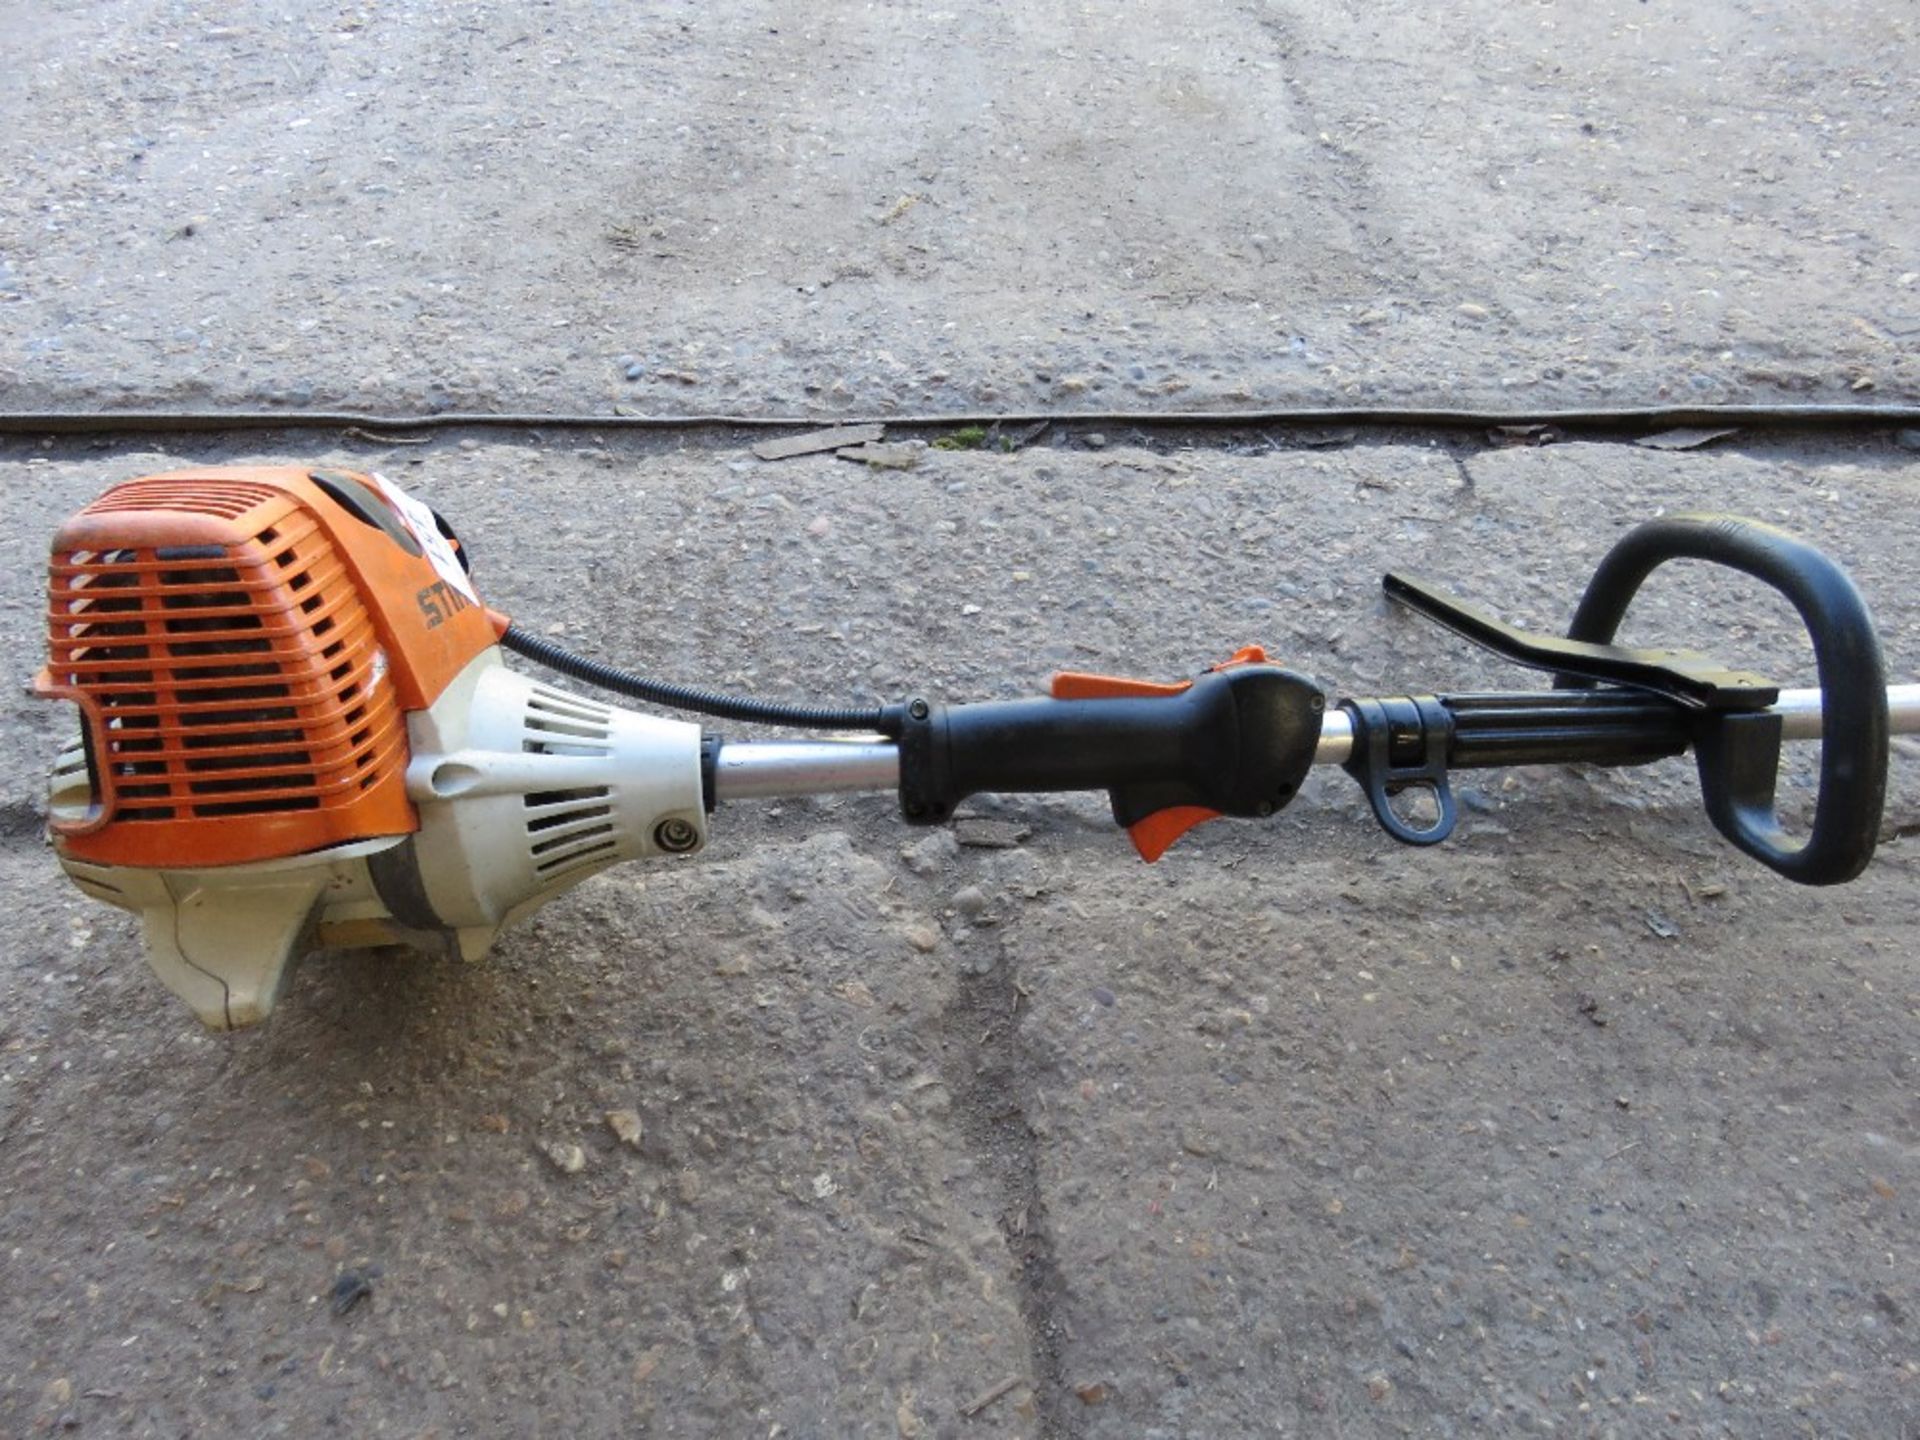 STIHL LONG REACH PETROL ENGINED HEDGE CUTTER. THIS LOT IS SOLD UNDER THE AUCTIONEERS MARGIN SCHEM - Image 5 of 6